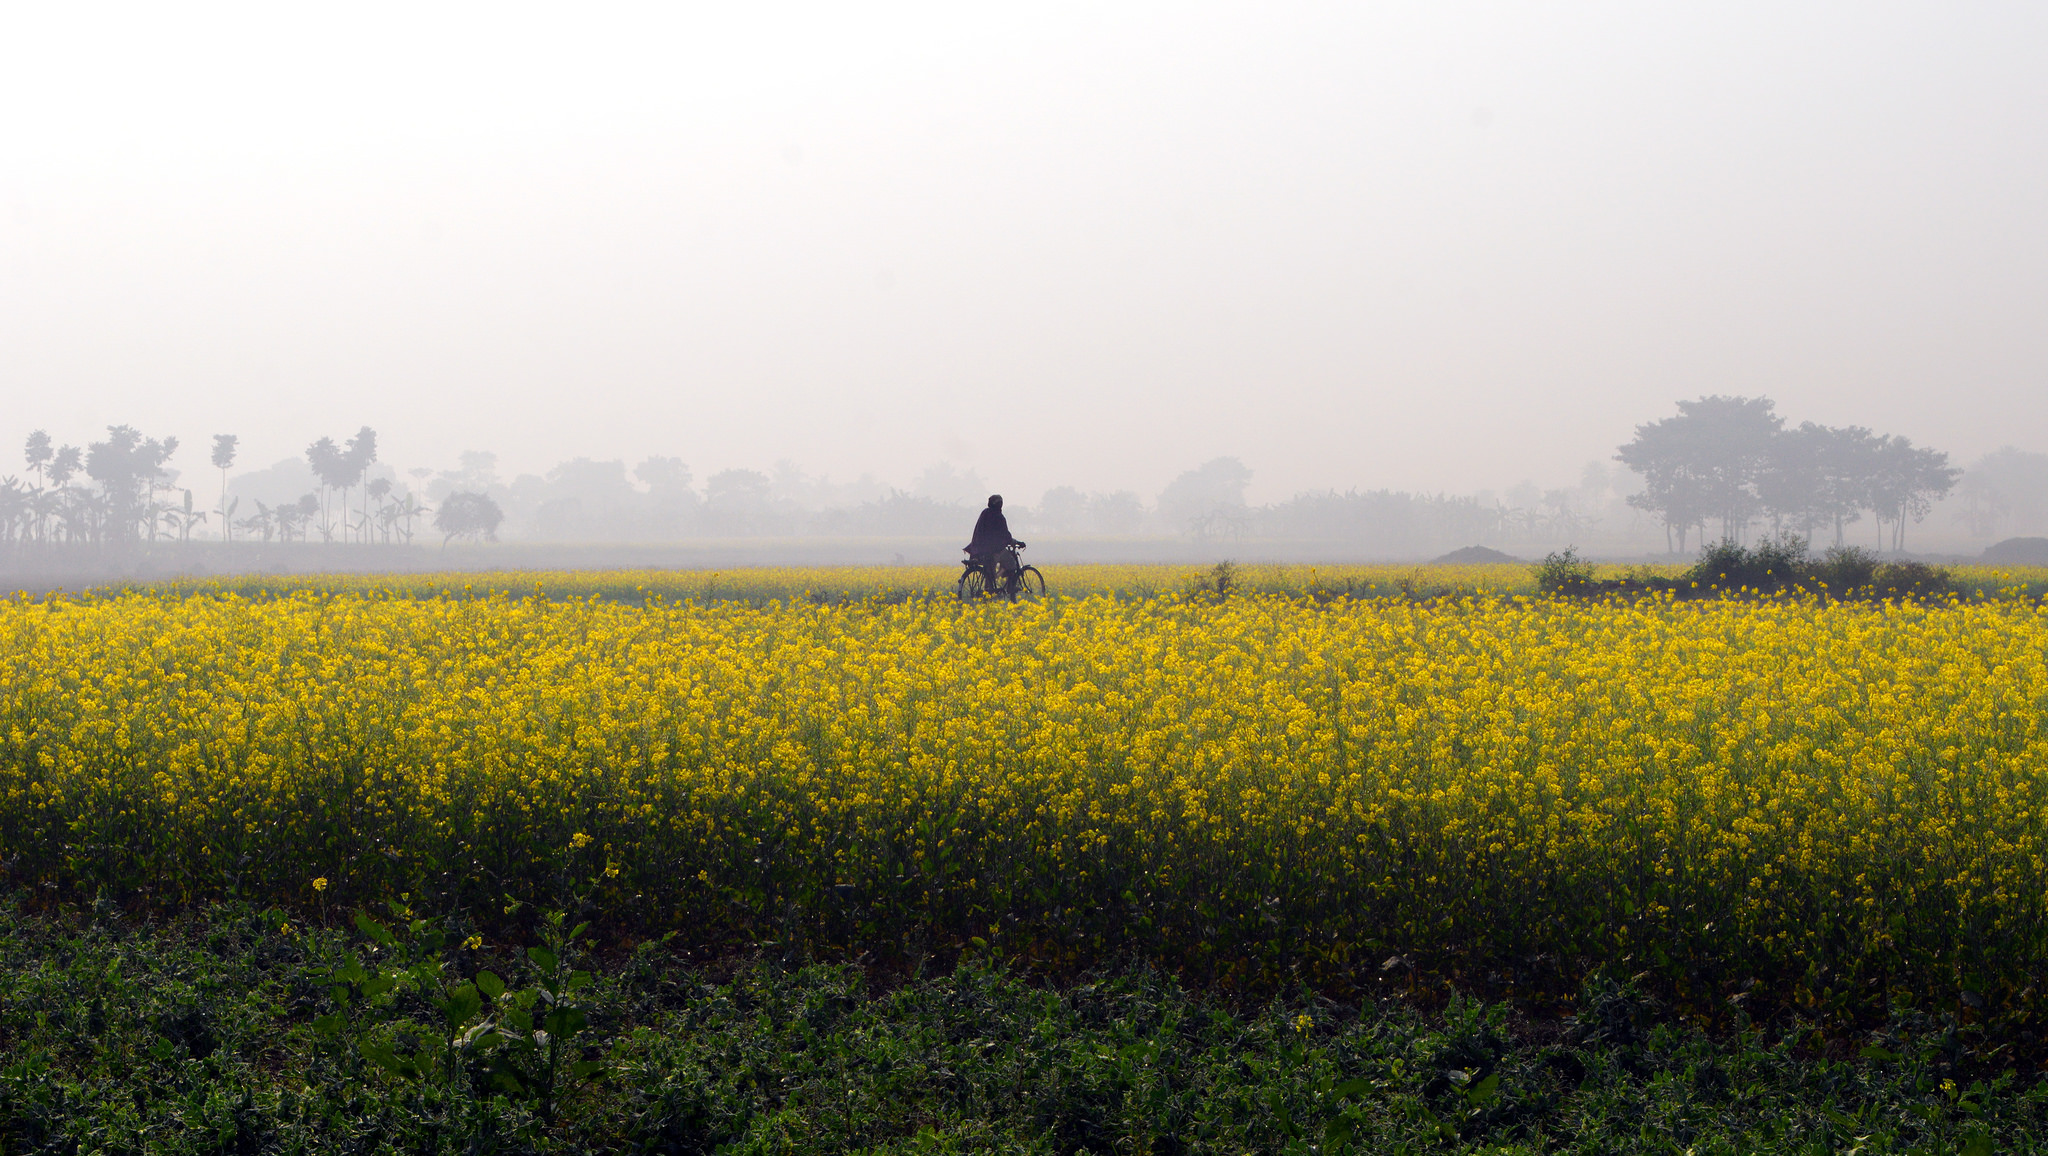 A field of mustard flowers in Nadia, West Bengal. Credit: kgabhi/Flickr, CC BY 2.0